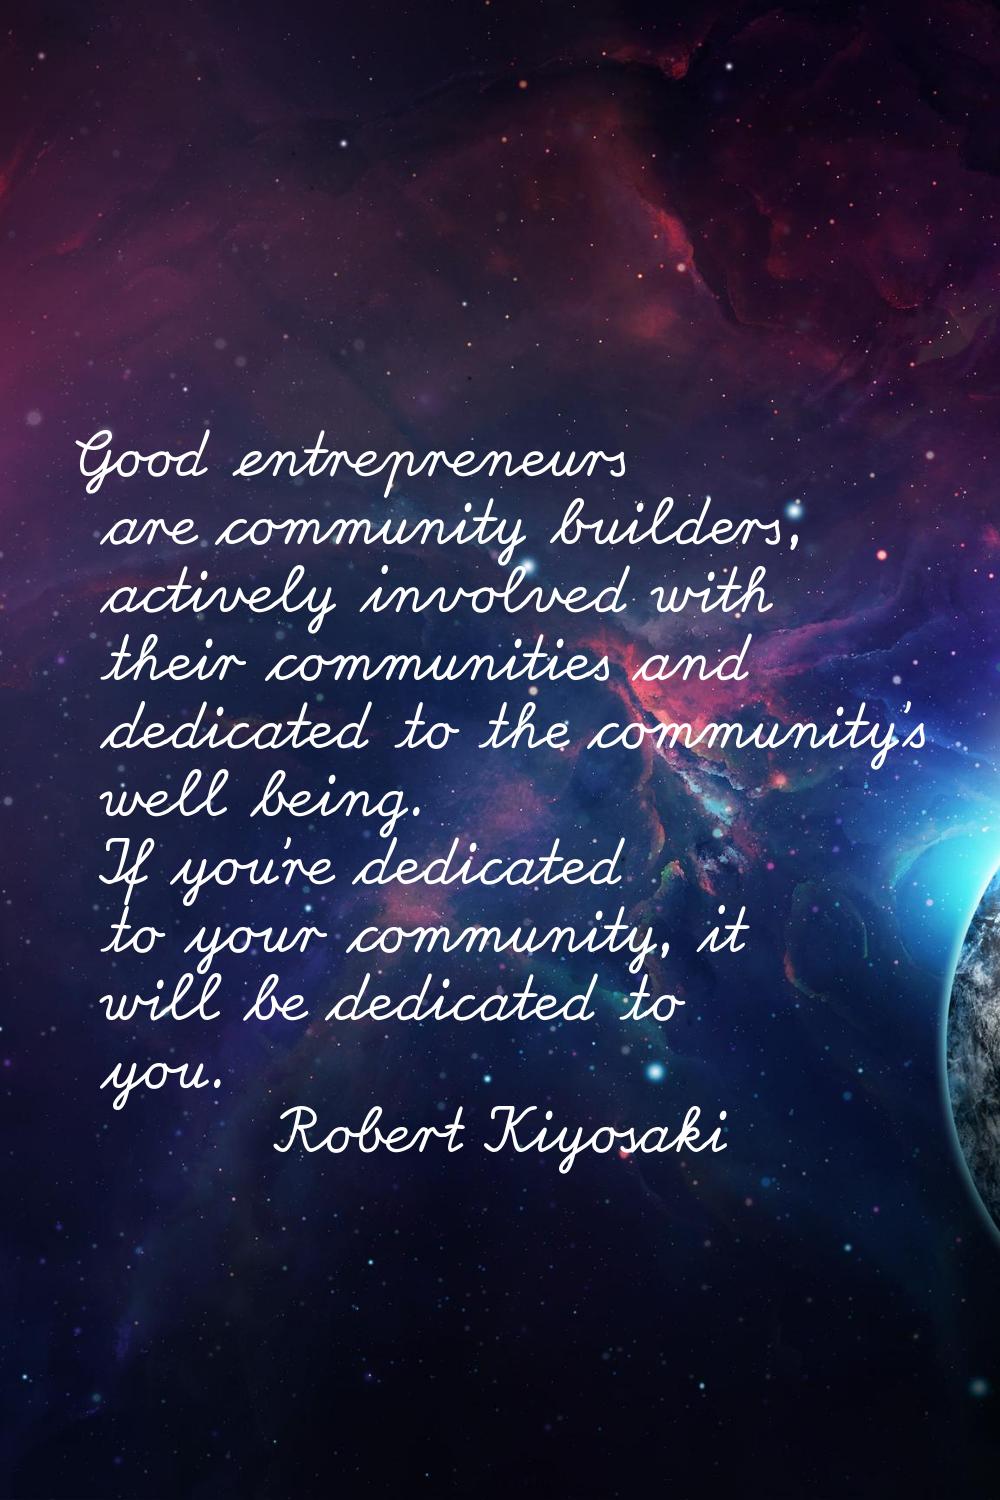 Good entrepreneurs are community builders, actively involved with their communities and dedicated t